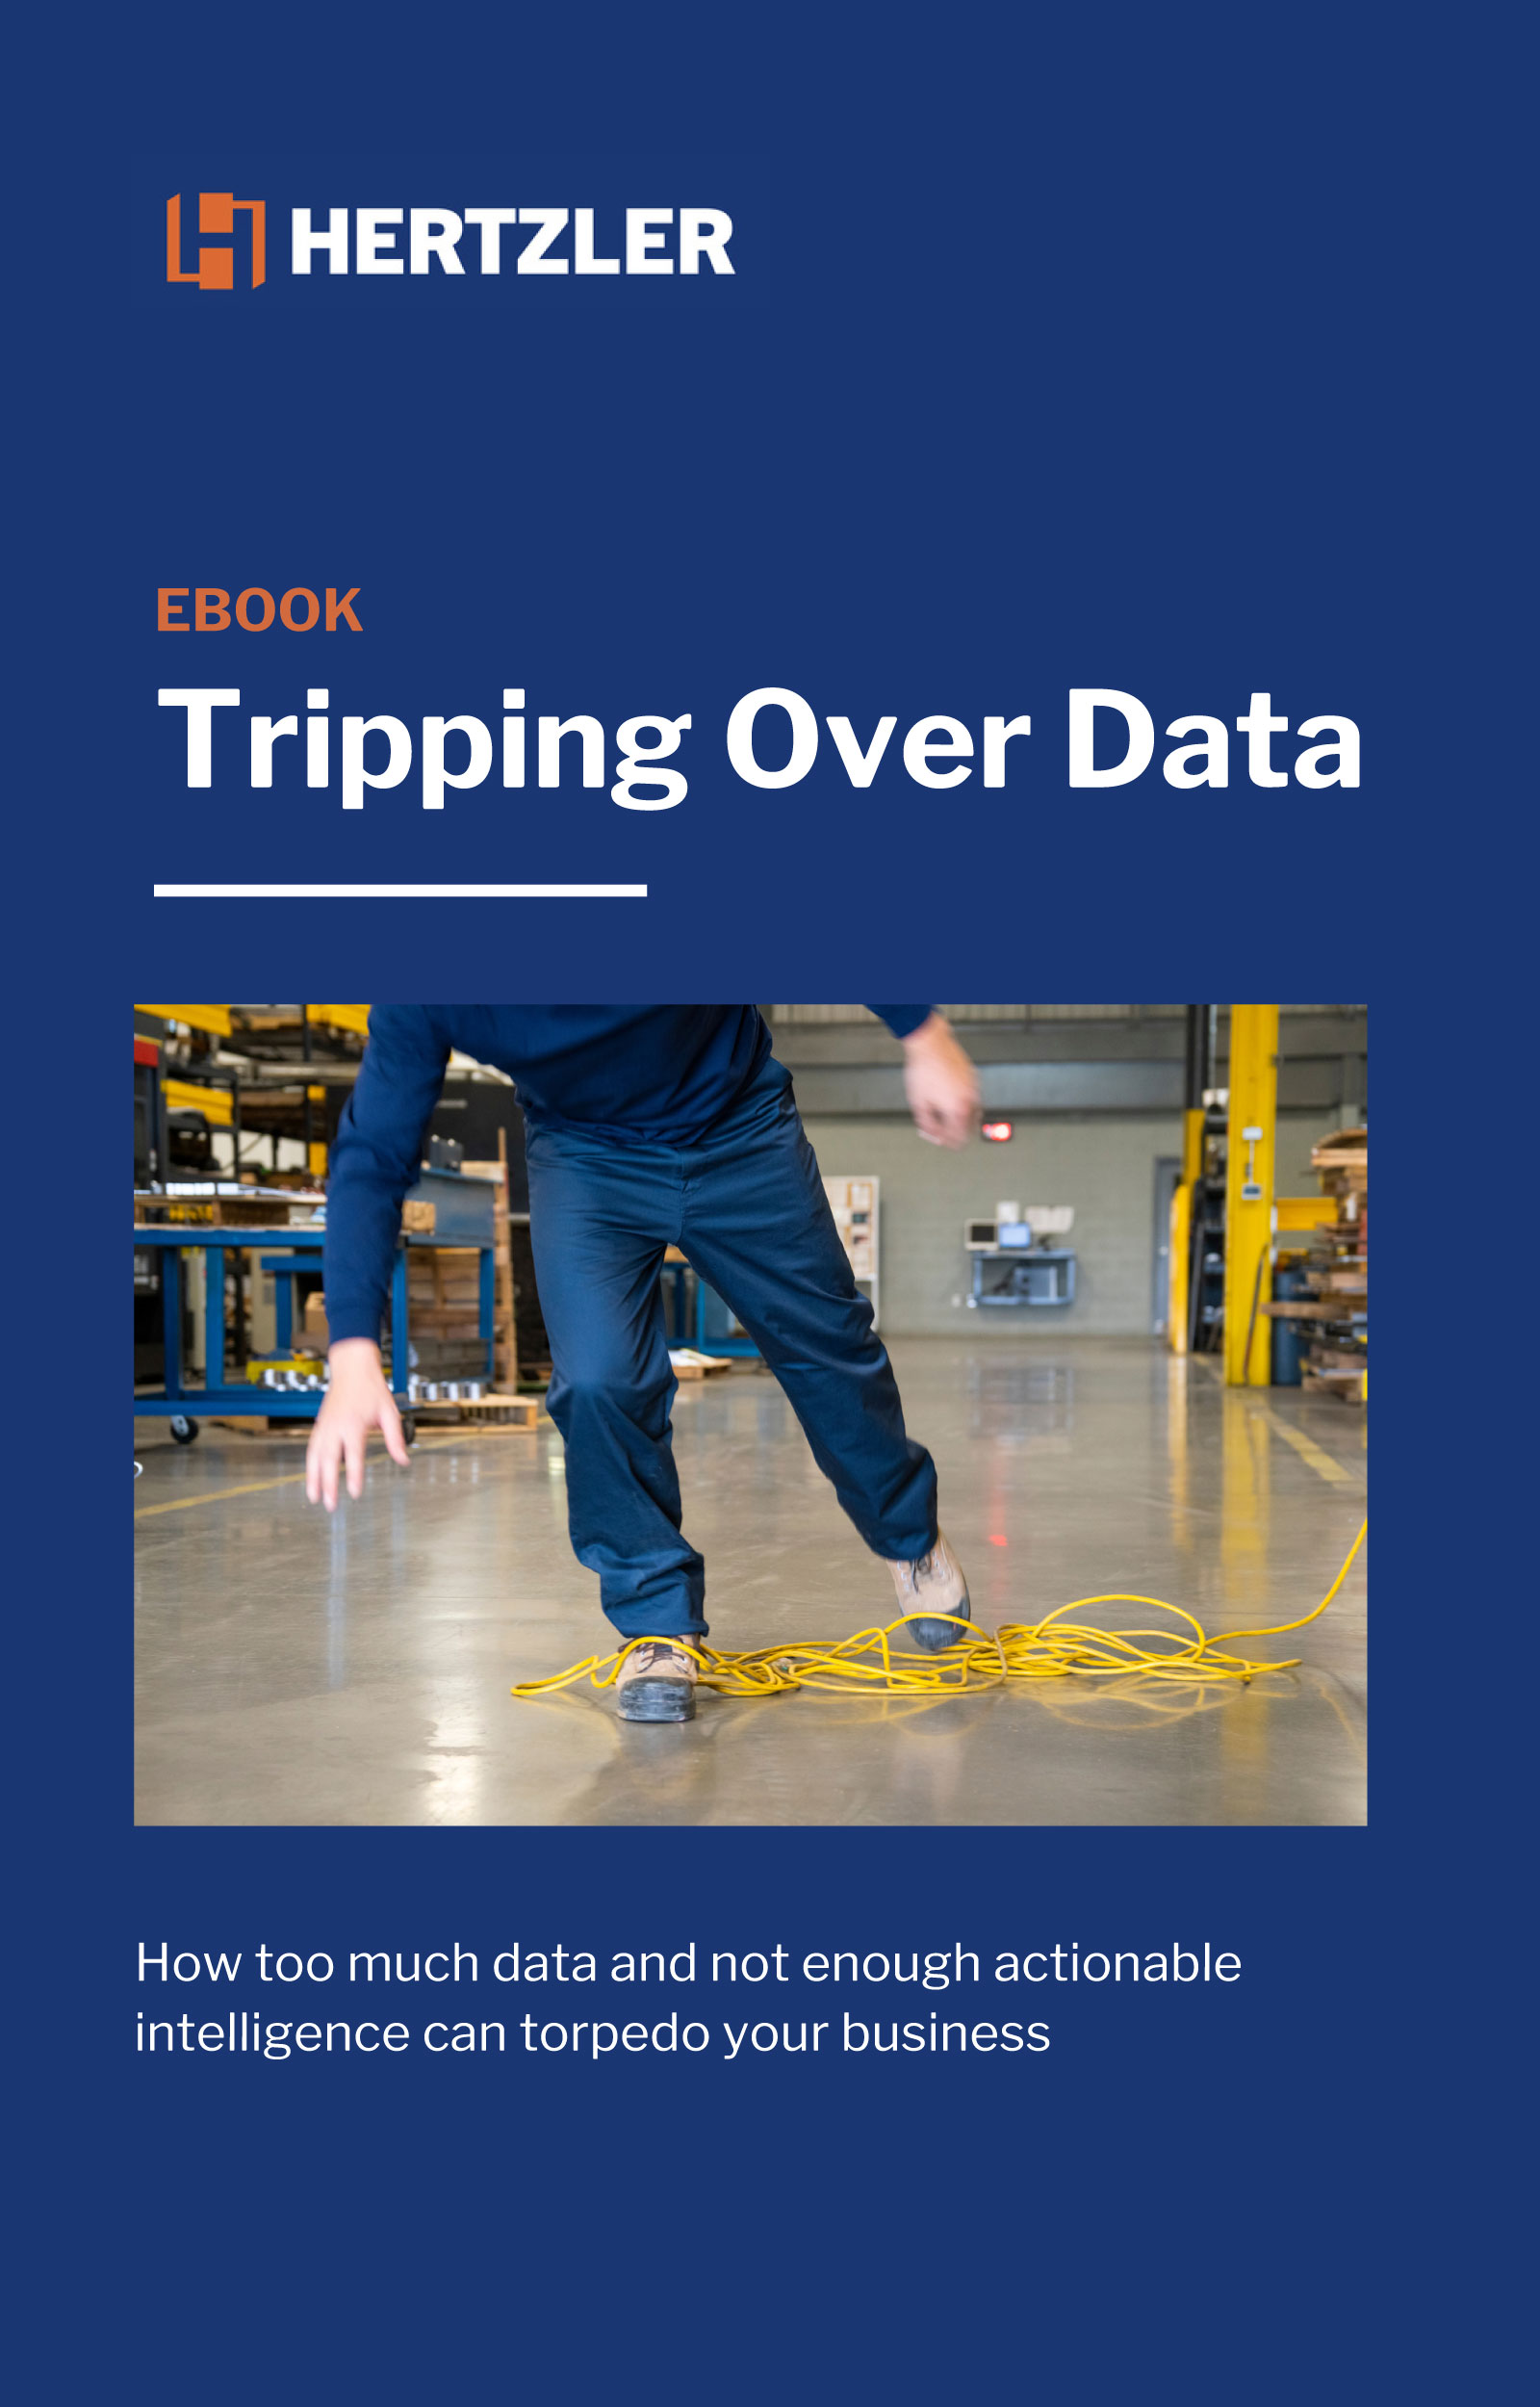 Tripping Over Data EBOOK